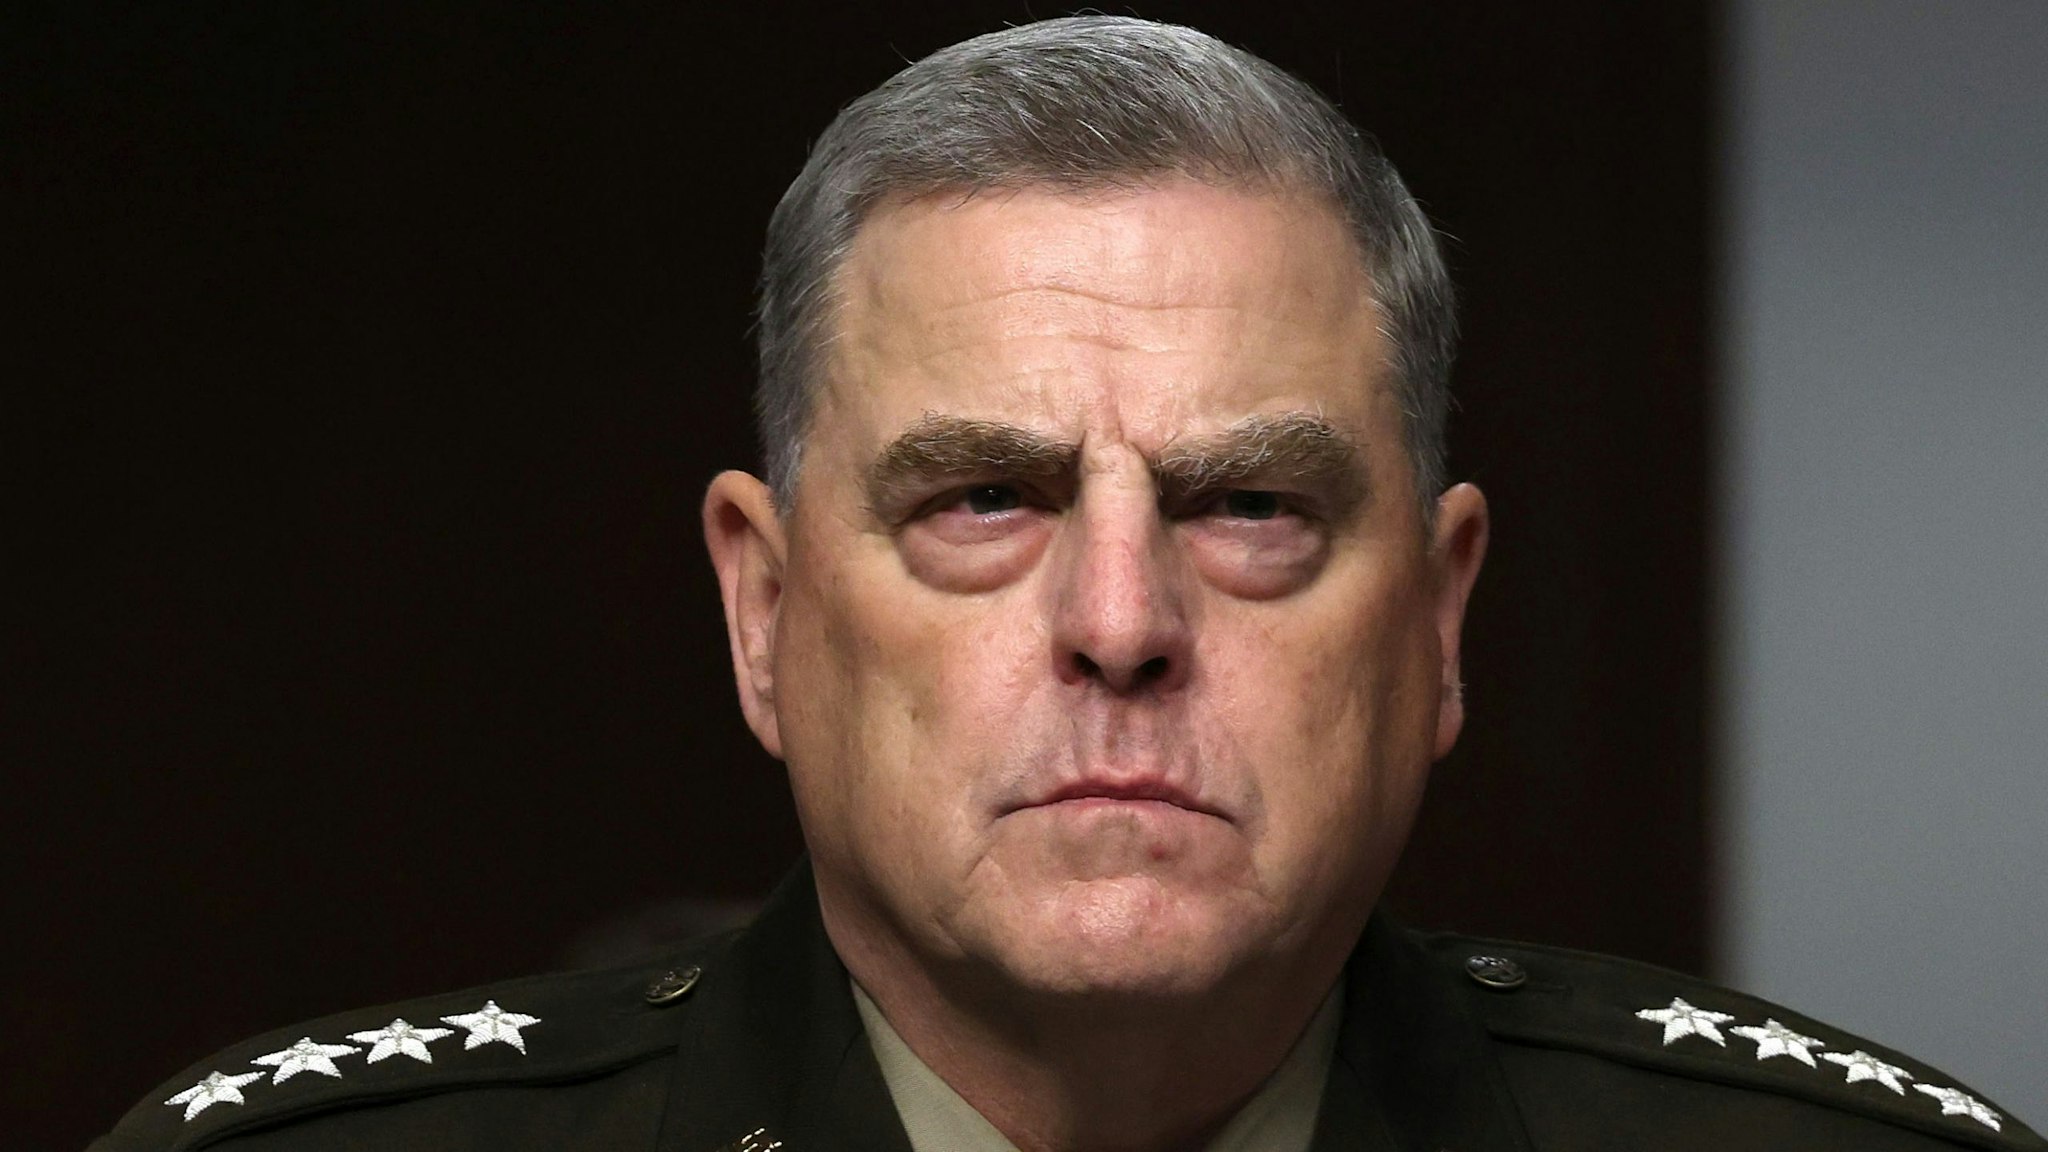 WASHINGTON, DC - JUNE 10: Chairman of the Joint Chiefs of Staff Gen. Mark Milley listens during a Senate Armed Services Committee hearing on Capitol Hill on June 10, 2021 in Washington, DC. The hearing was held to discuss the Defense Department’s Fiscal Year 2022 budget proposal.